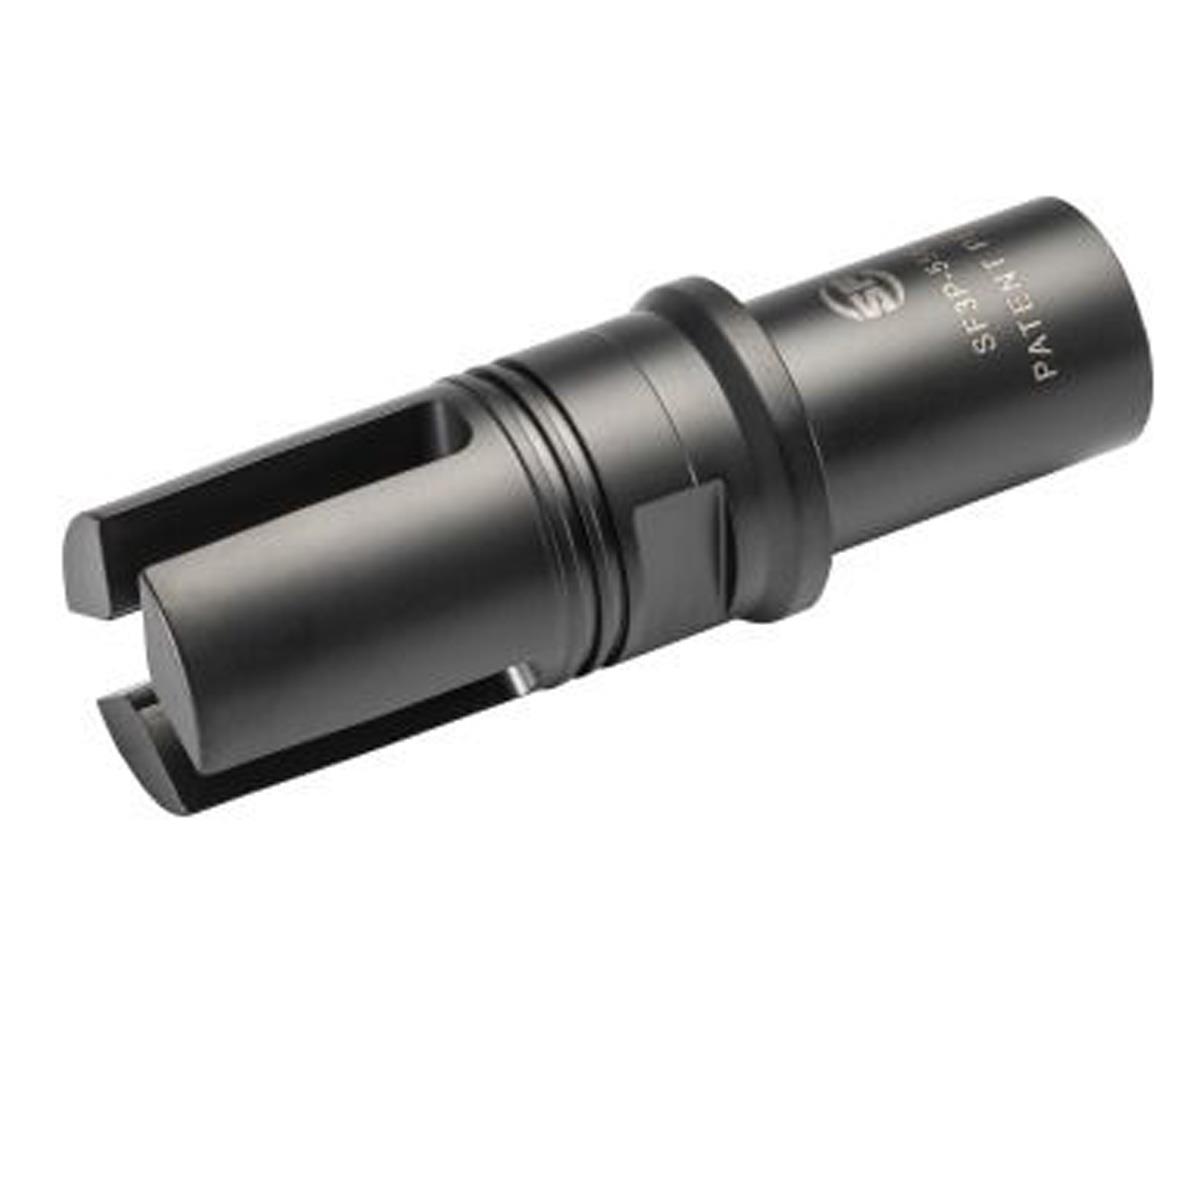 Image of SureFire 3 Prong Muzzle Brake for MP7 Variants